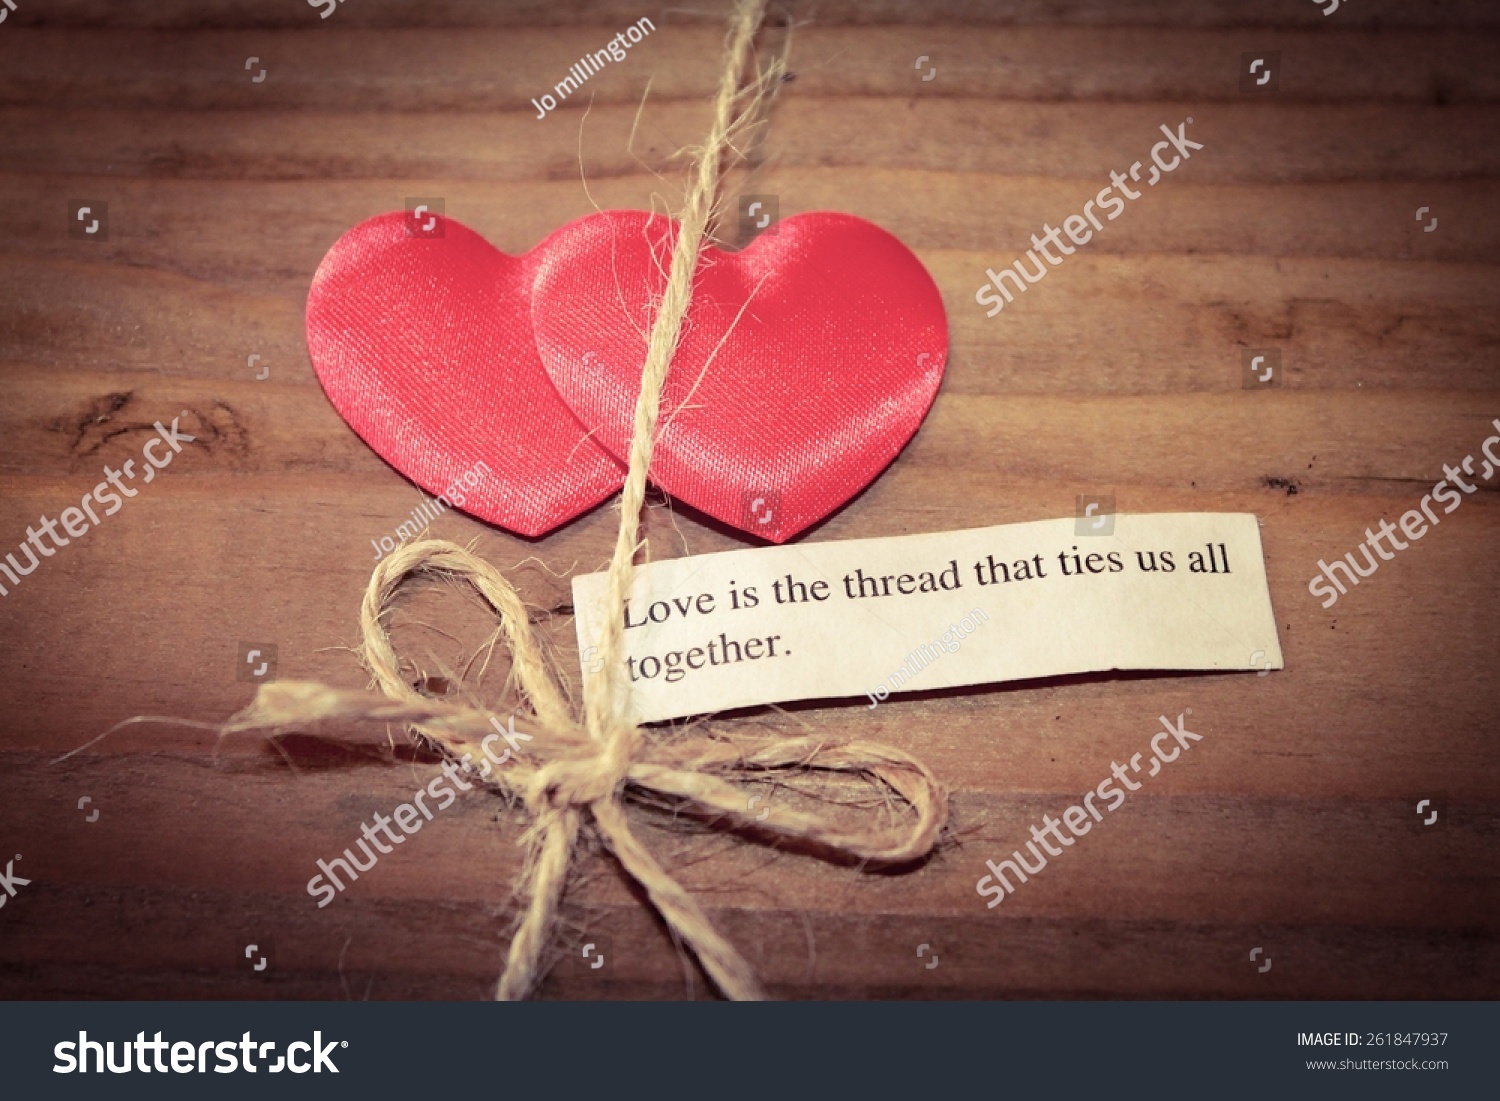 Two hearts tied to her with the quote Love is the thread that ties us all